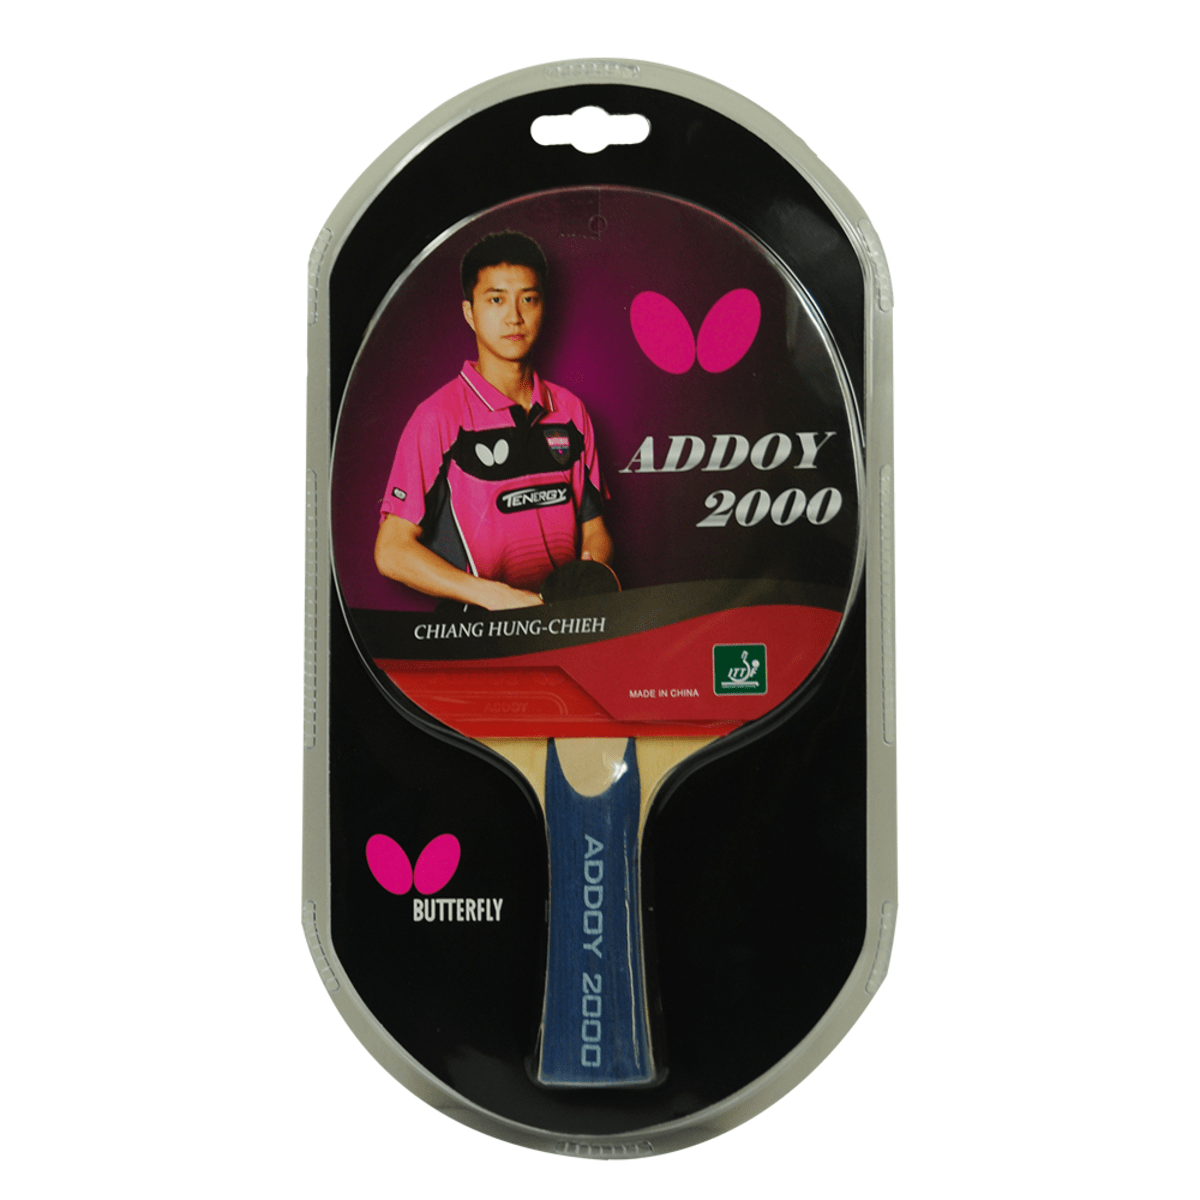 Butterfly Table Tennis Blade - Addoy 2000